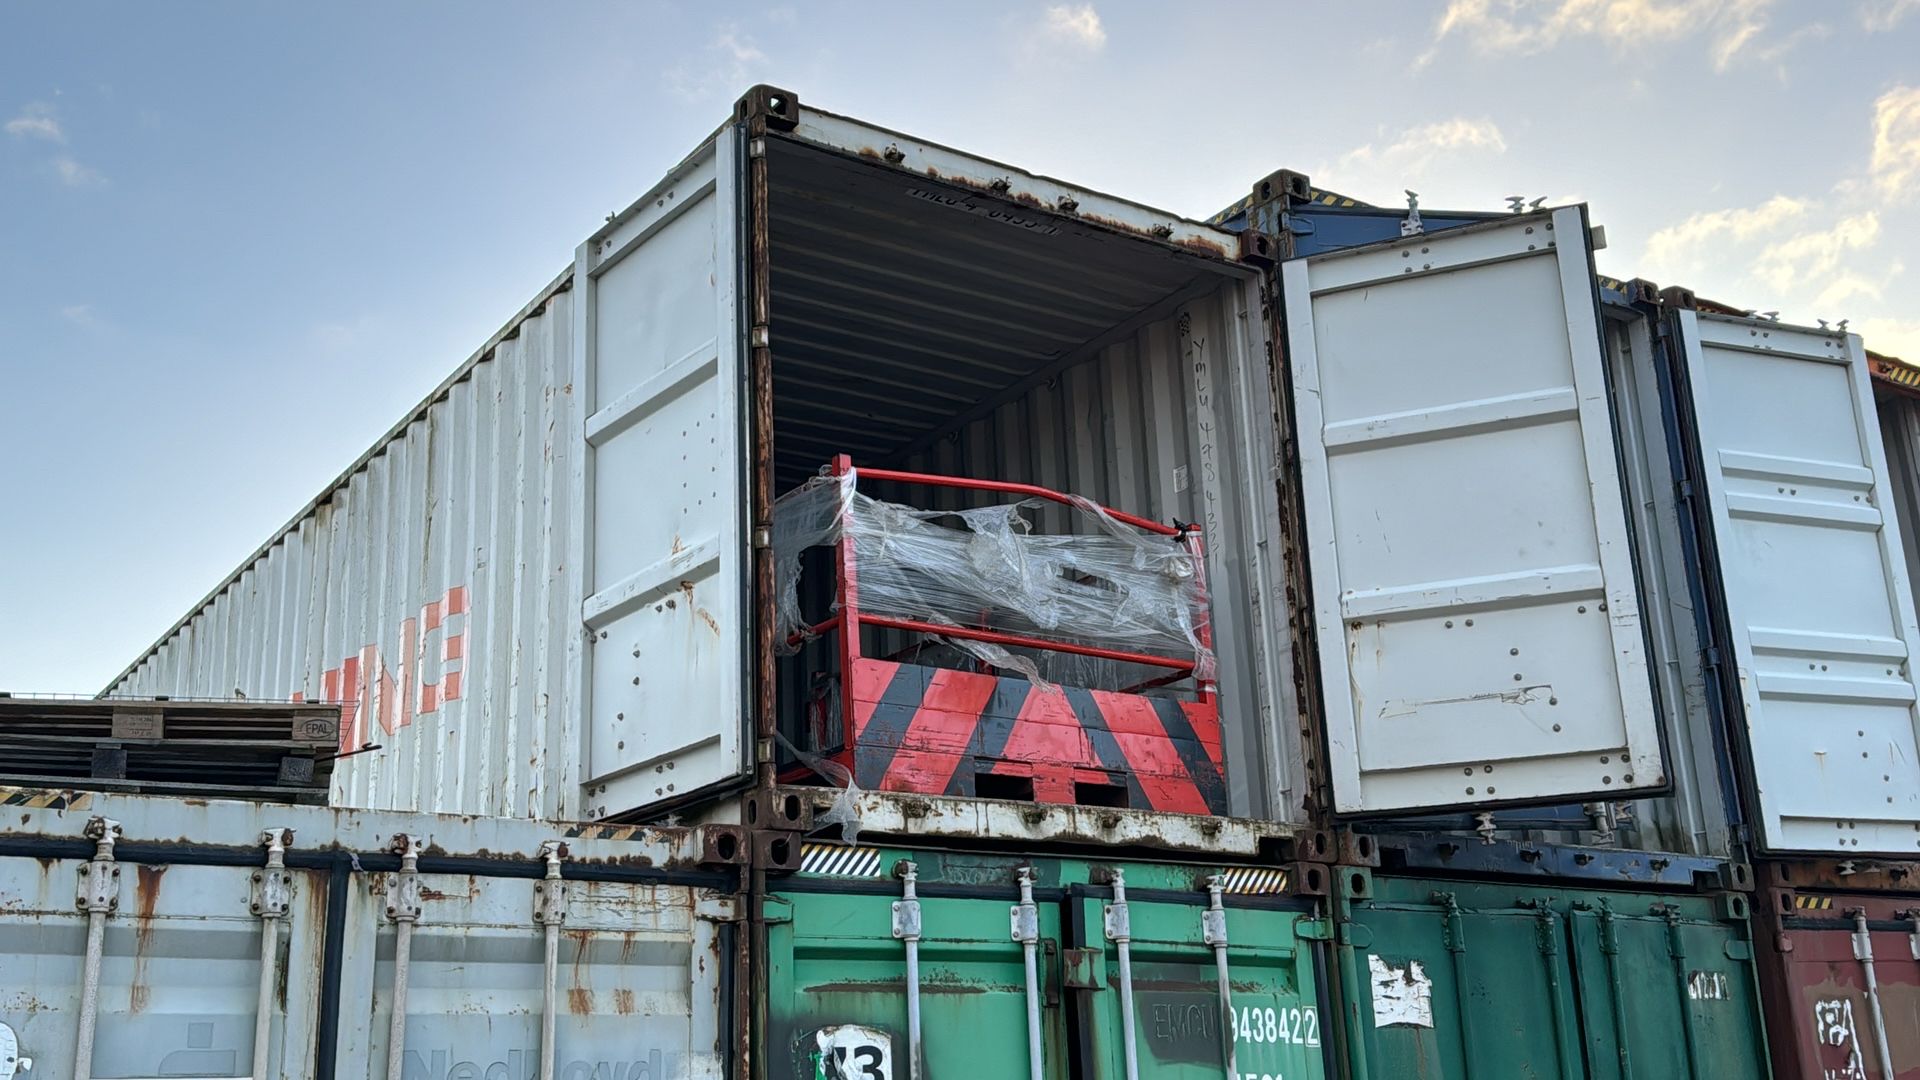 Shipping Container - 6 (YMLU4784331) - Image 2 of 2